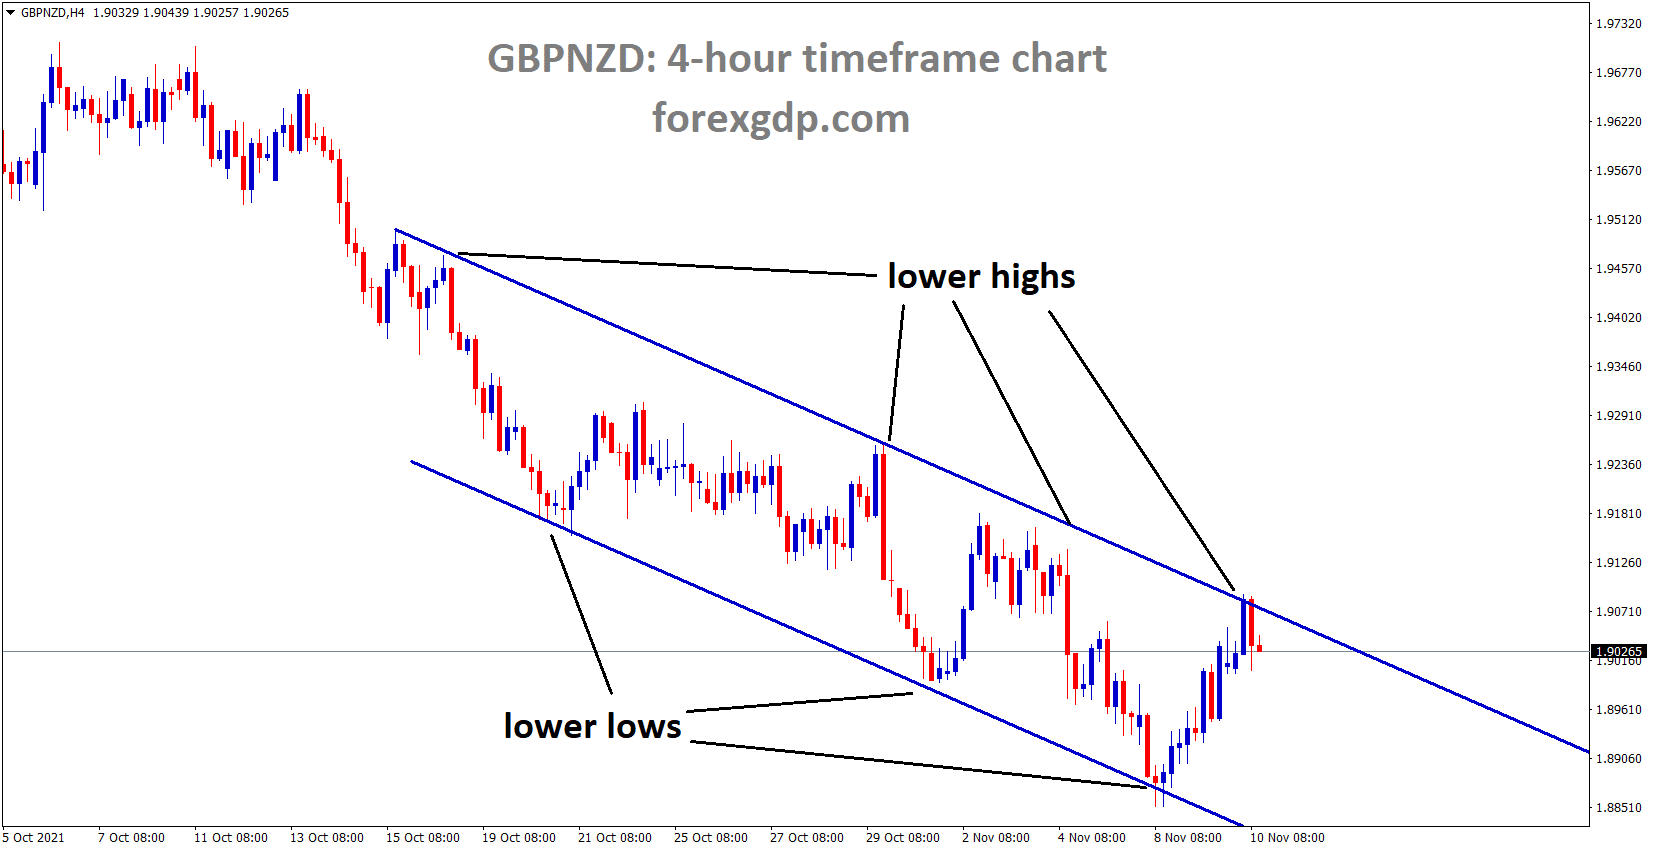 GBPNZD is moving in the Descending channel and the market is falling from the lower high area